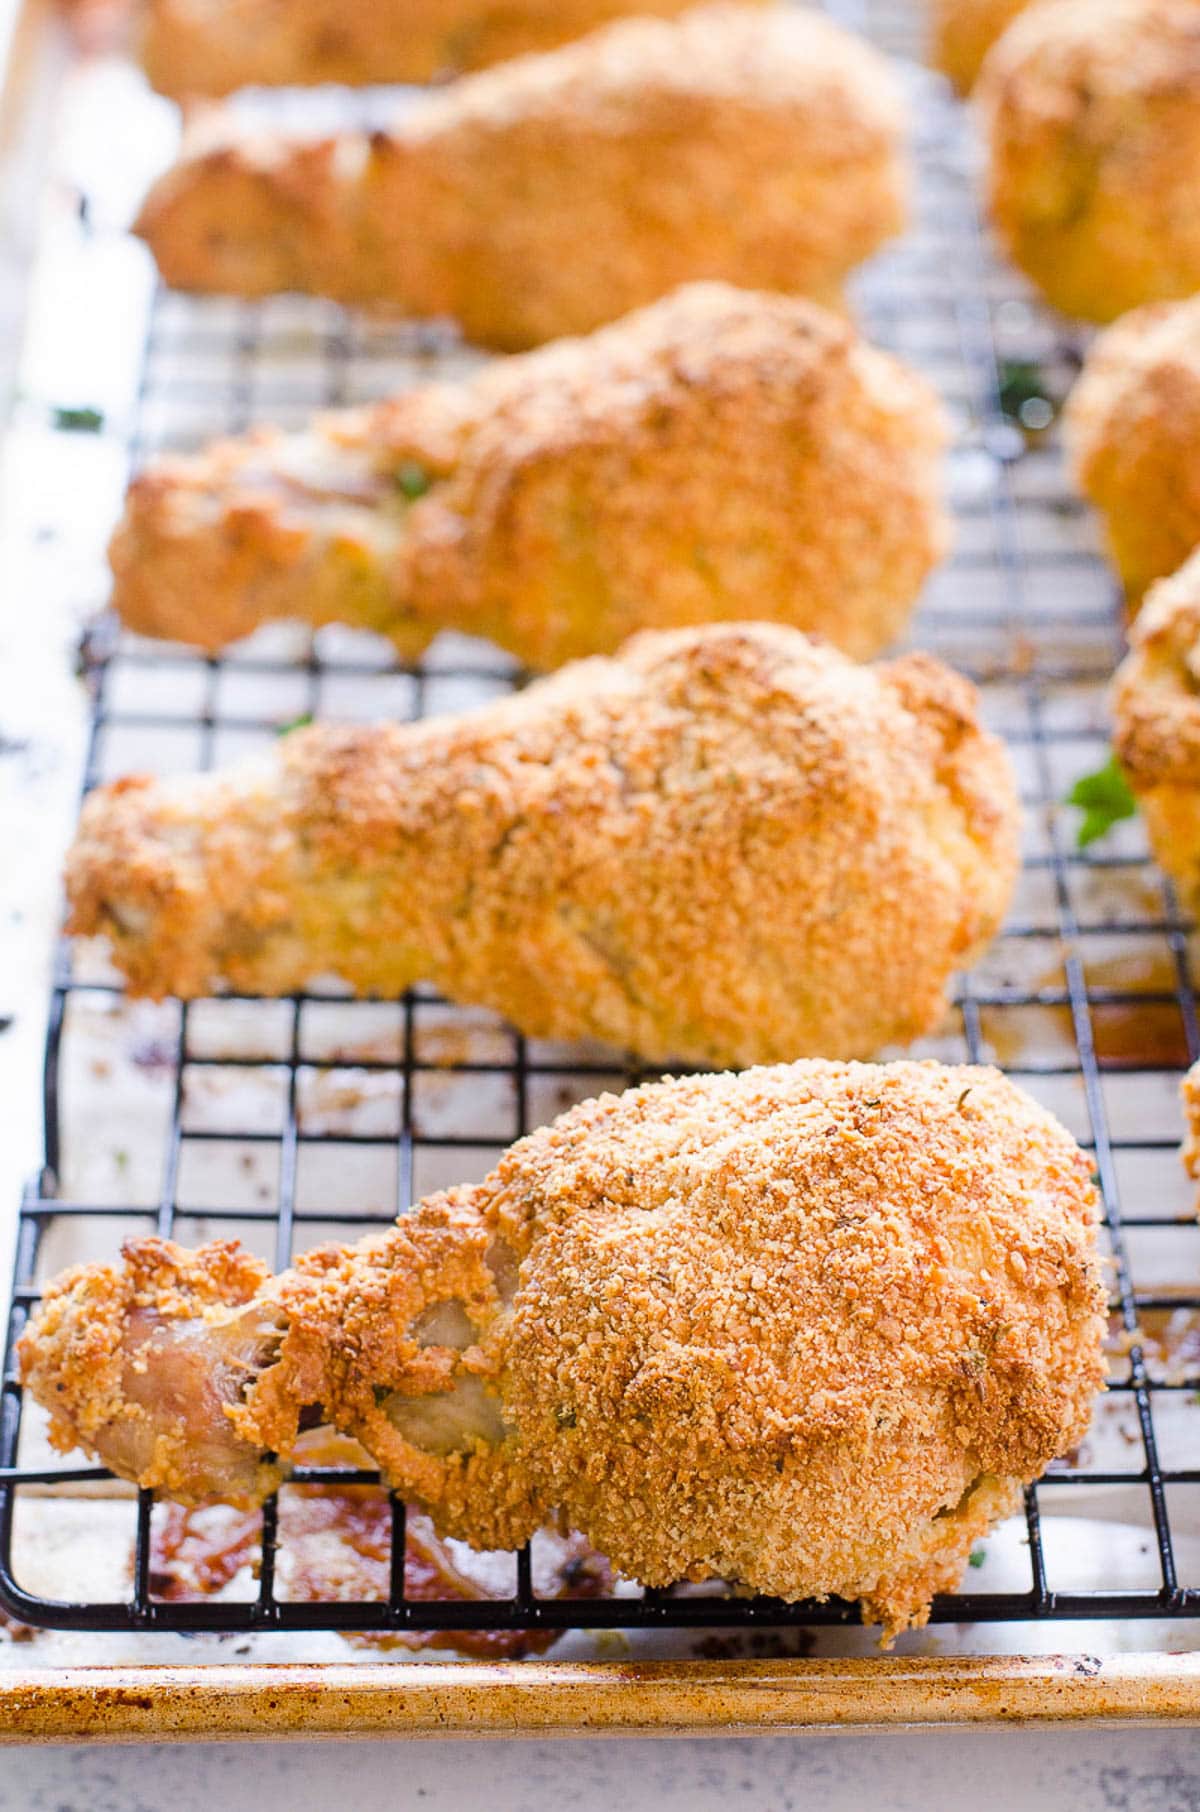 Healthy fried chicken drumsticks on a wire rack.